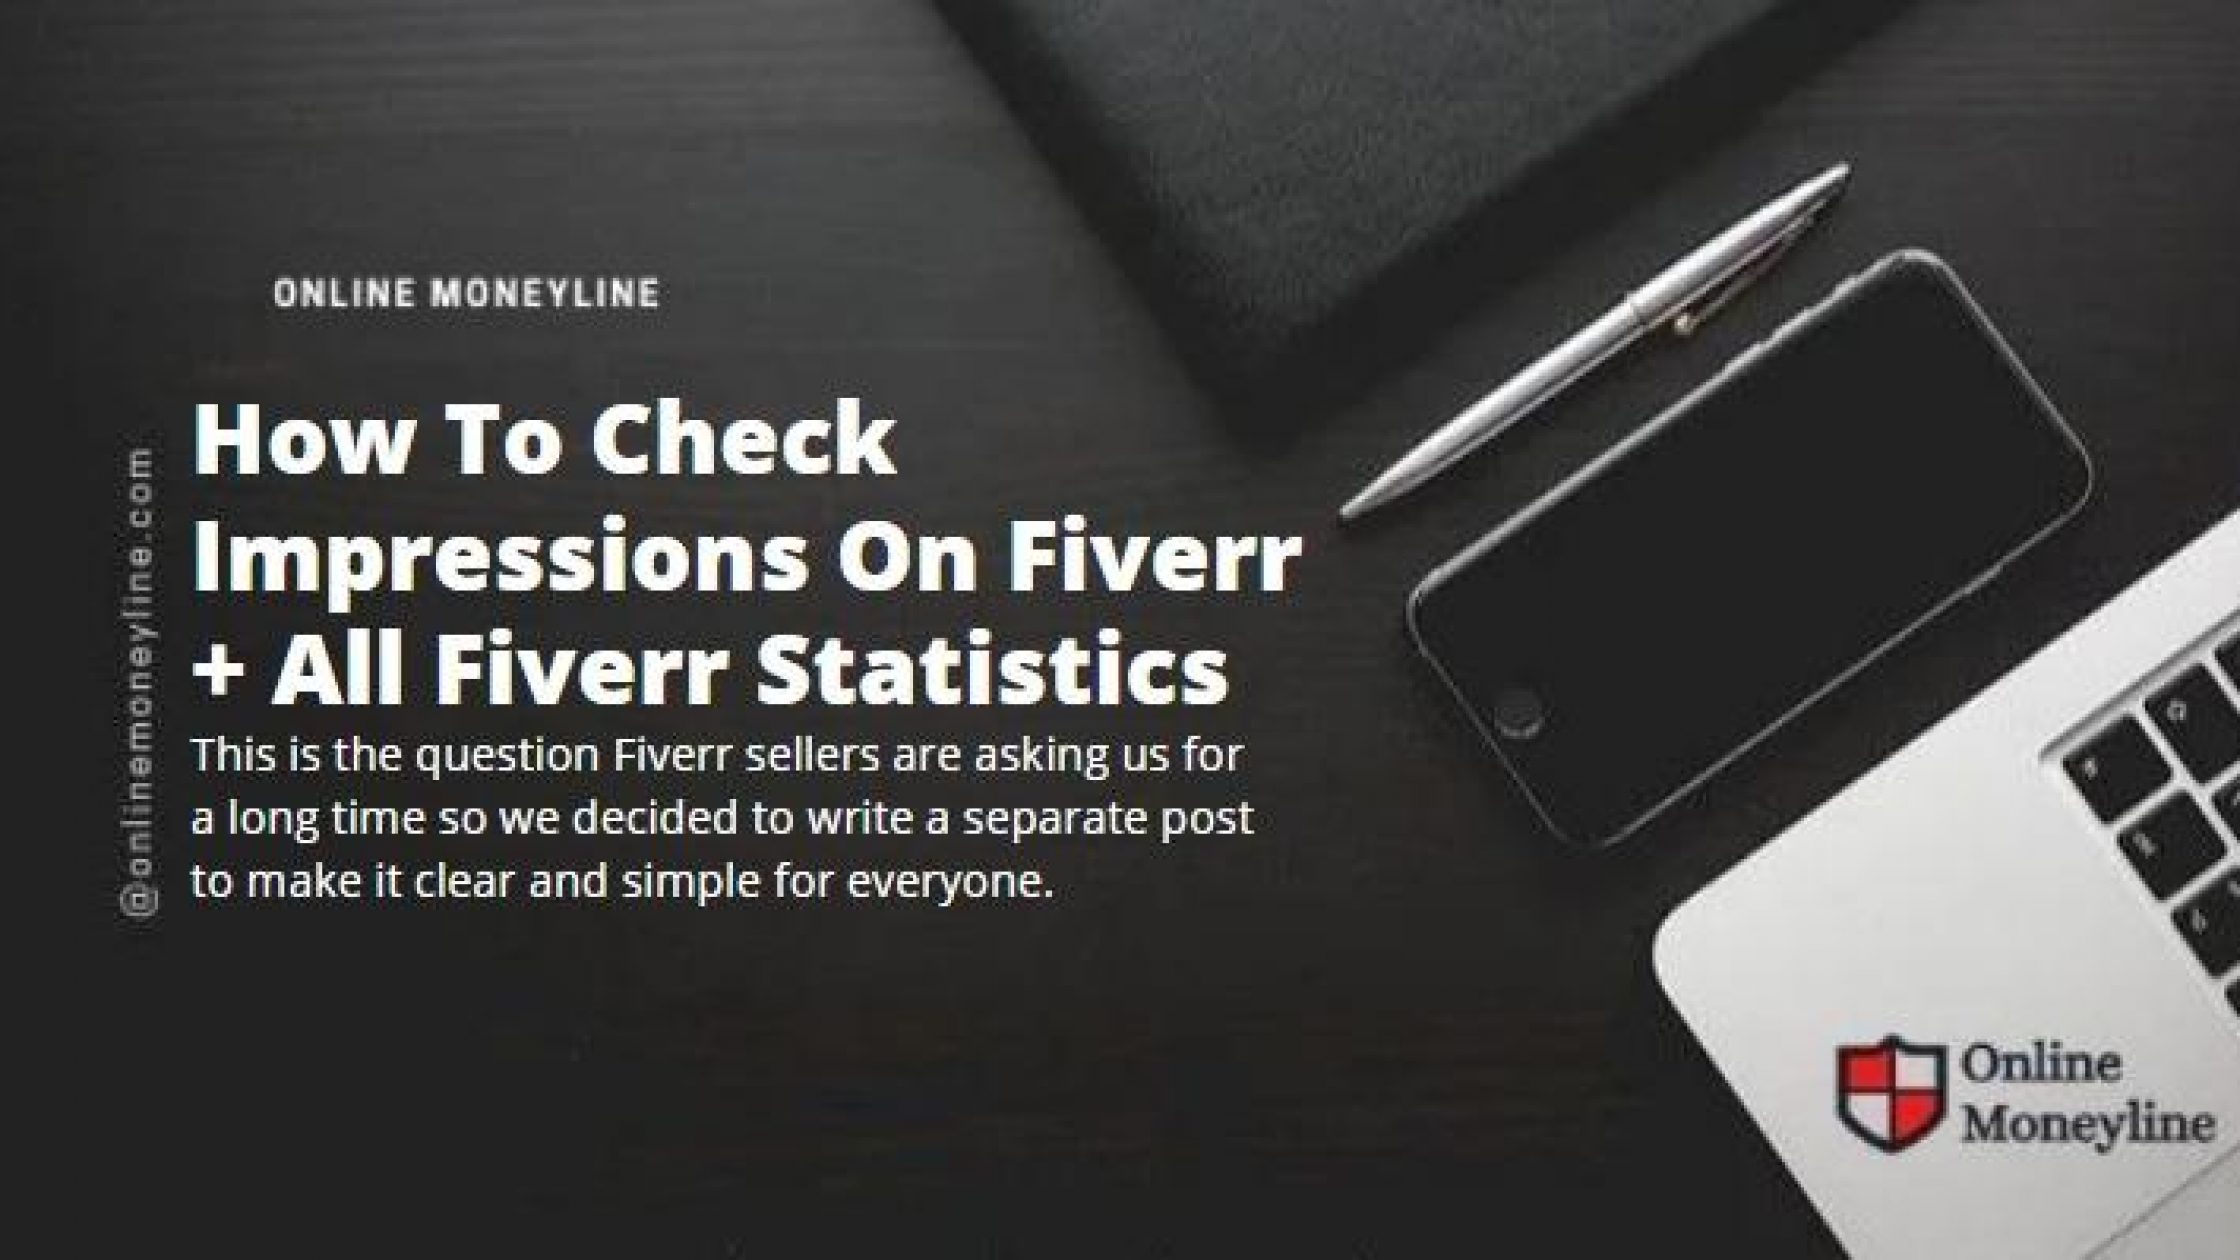 How To Check Impressions On Fiverr + All Fiverr Statistics